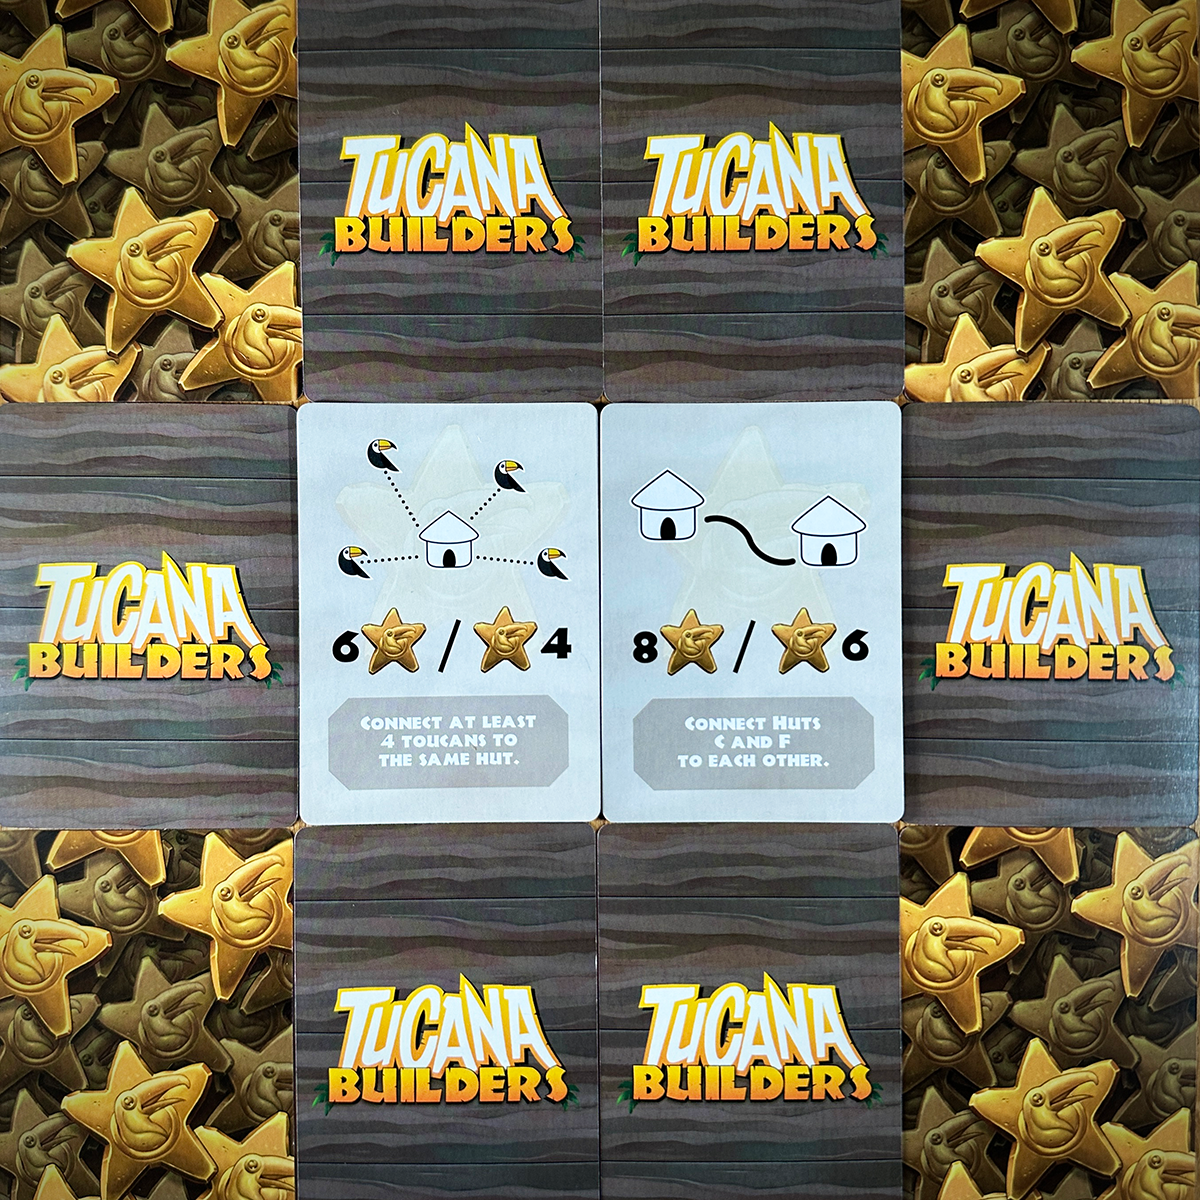 Tucana Builders Board Game Review Achievement Cards